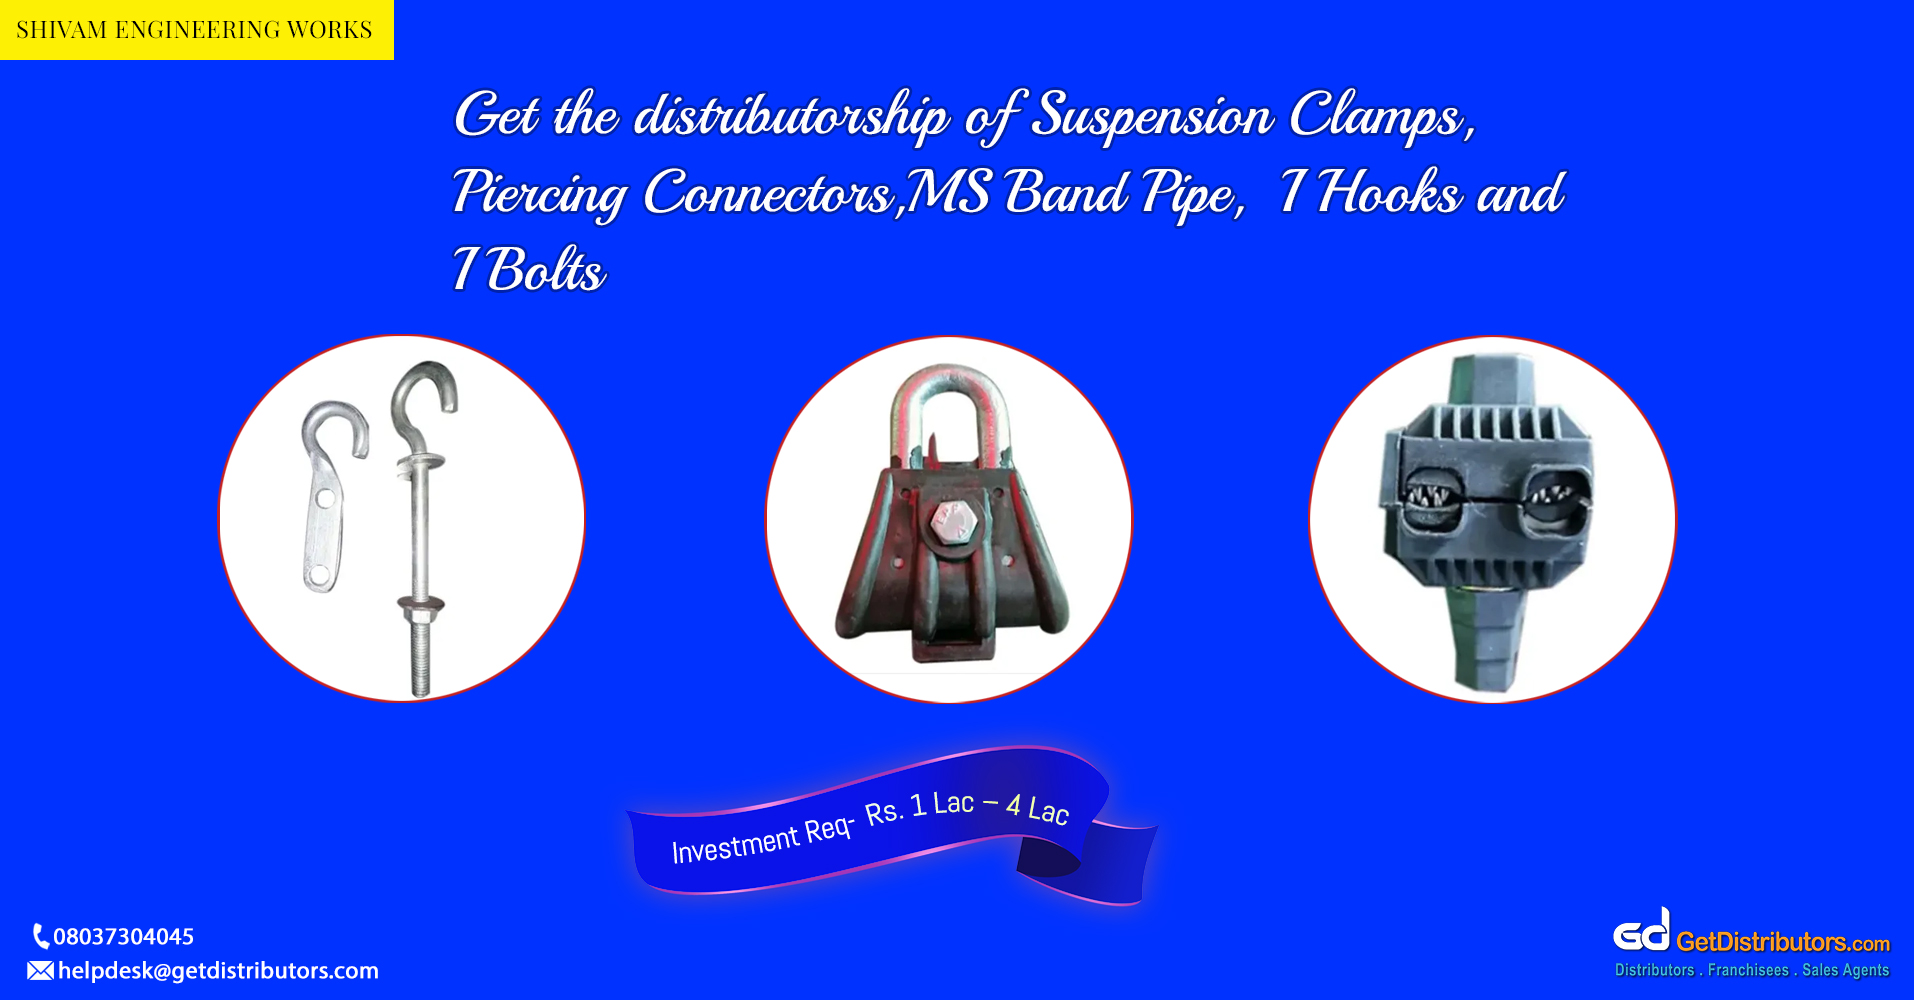 Distributorship of clamps, clips, bolts, and other items